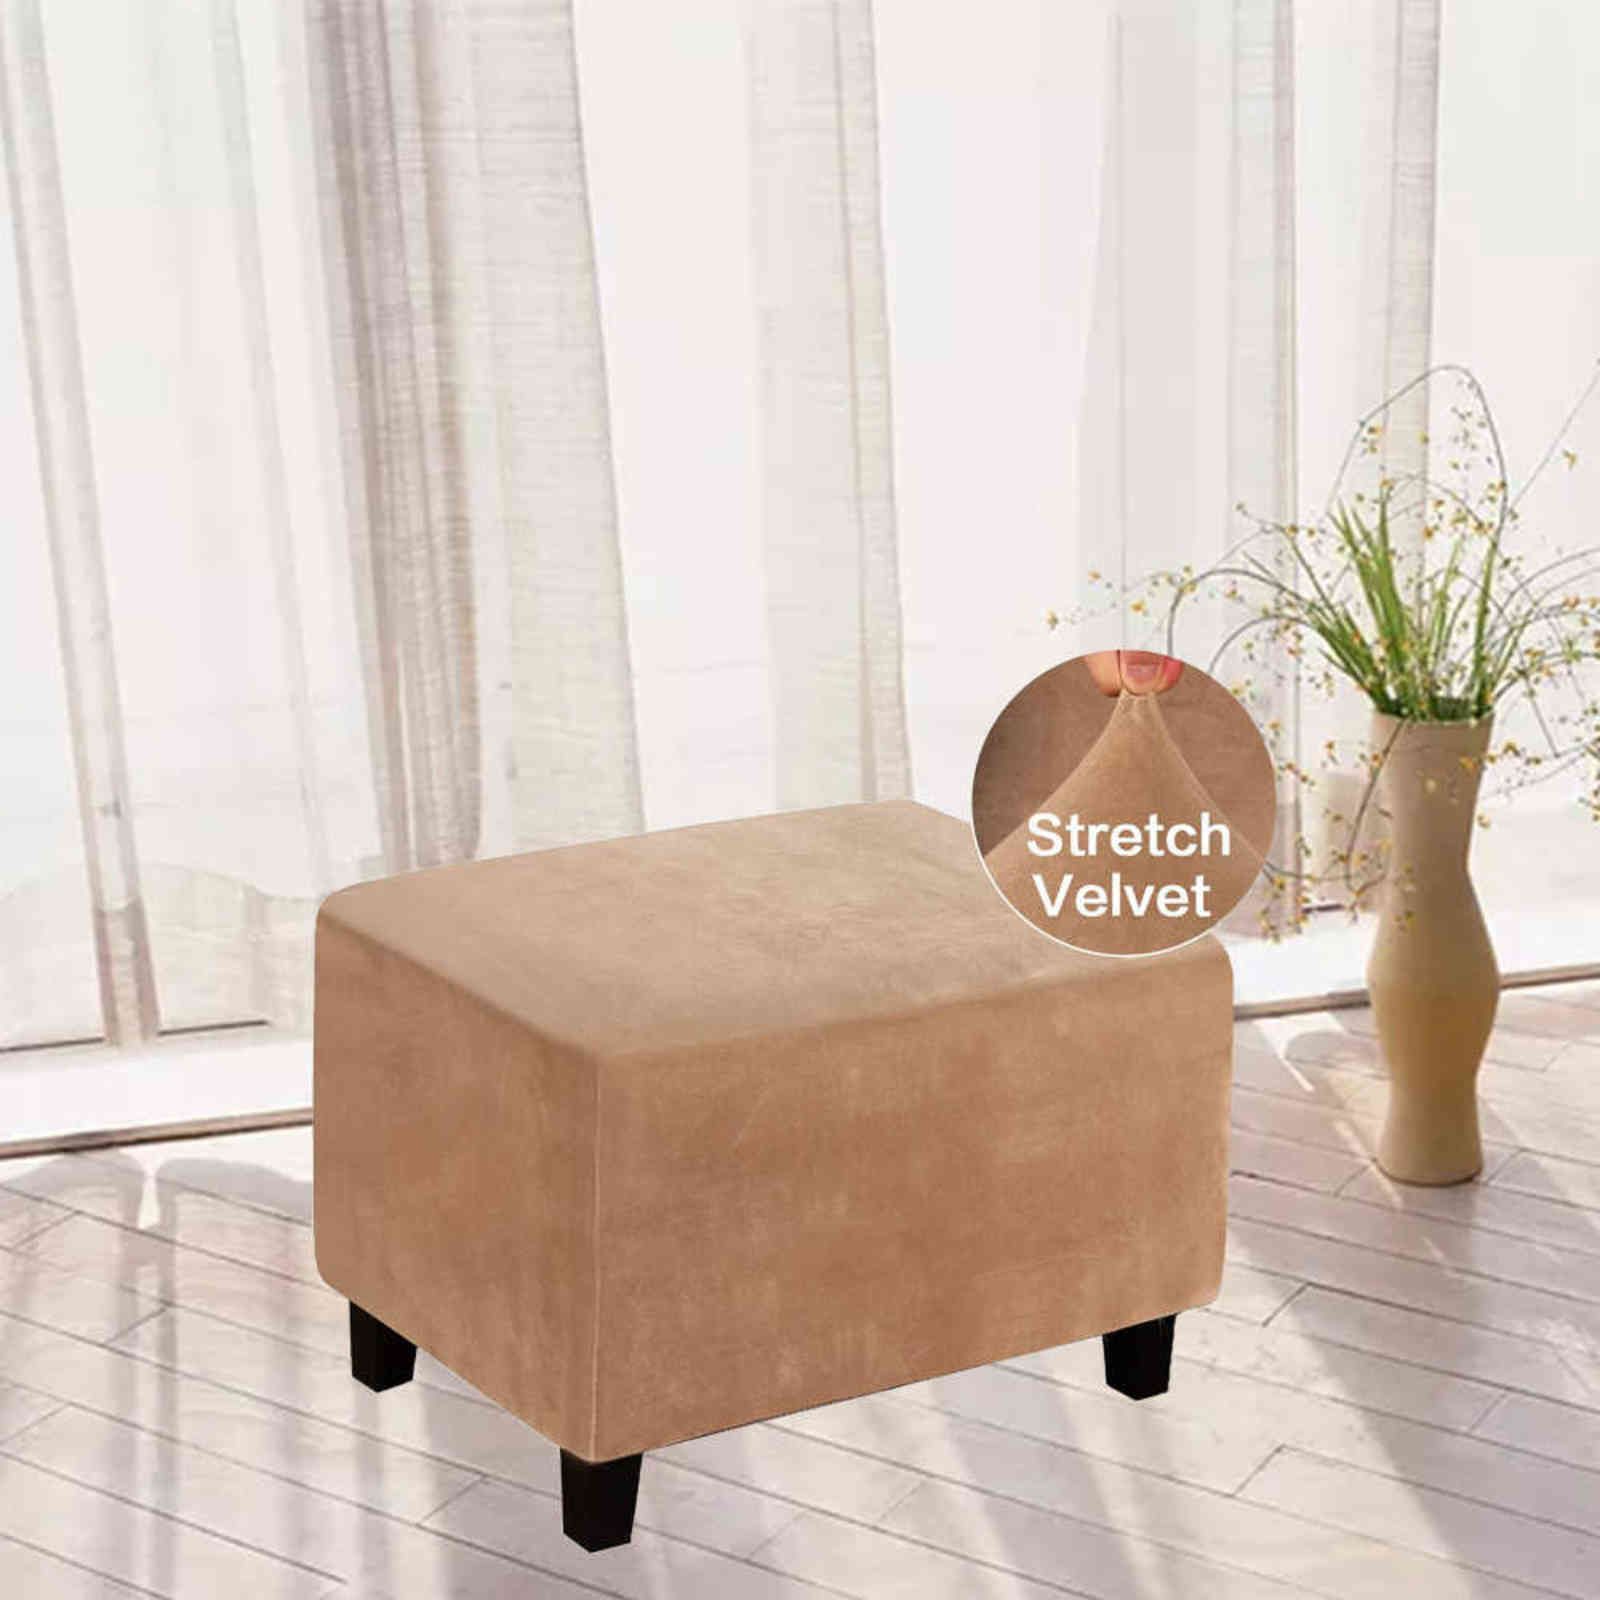 N5 FootStool Cover-XL